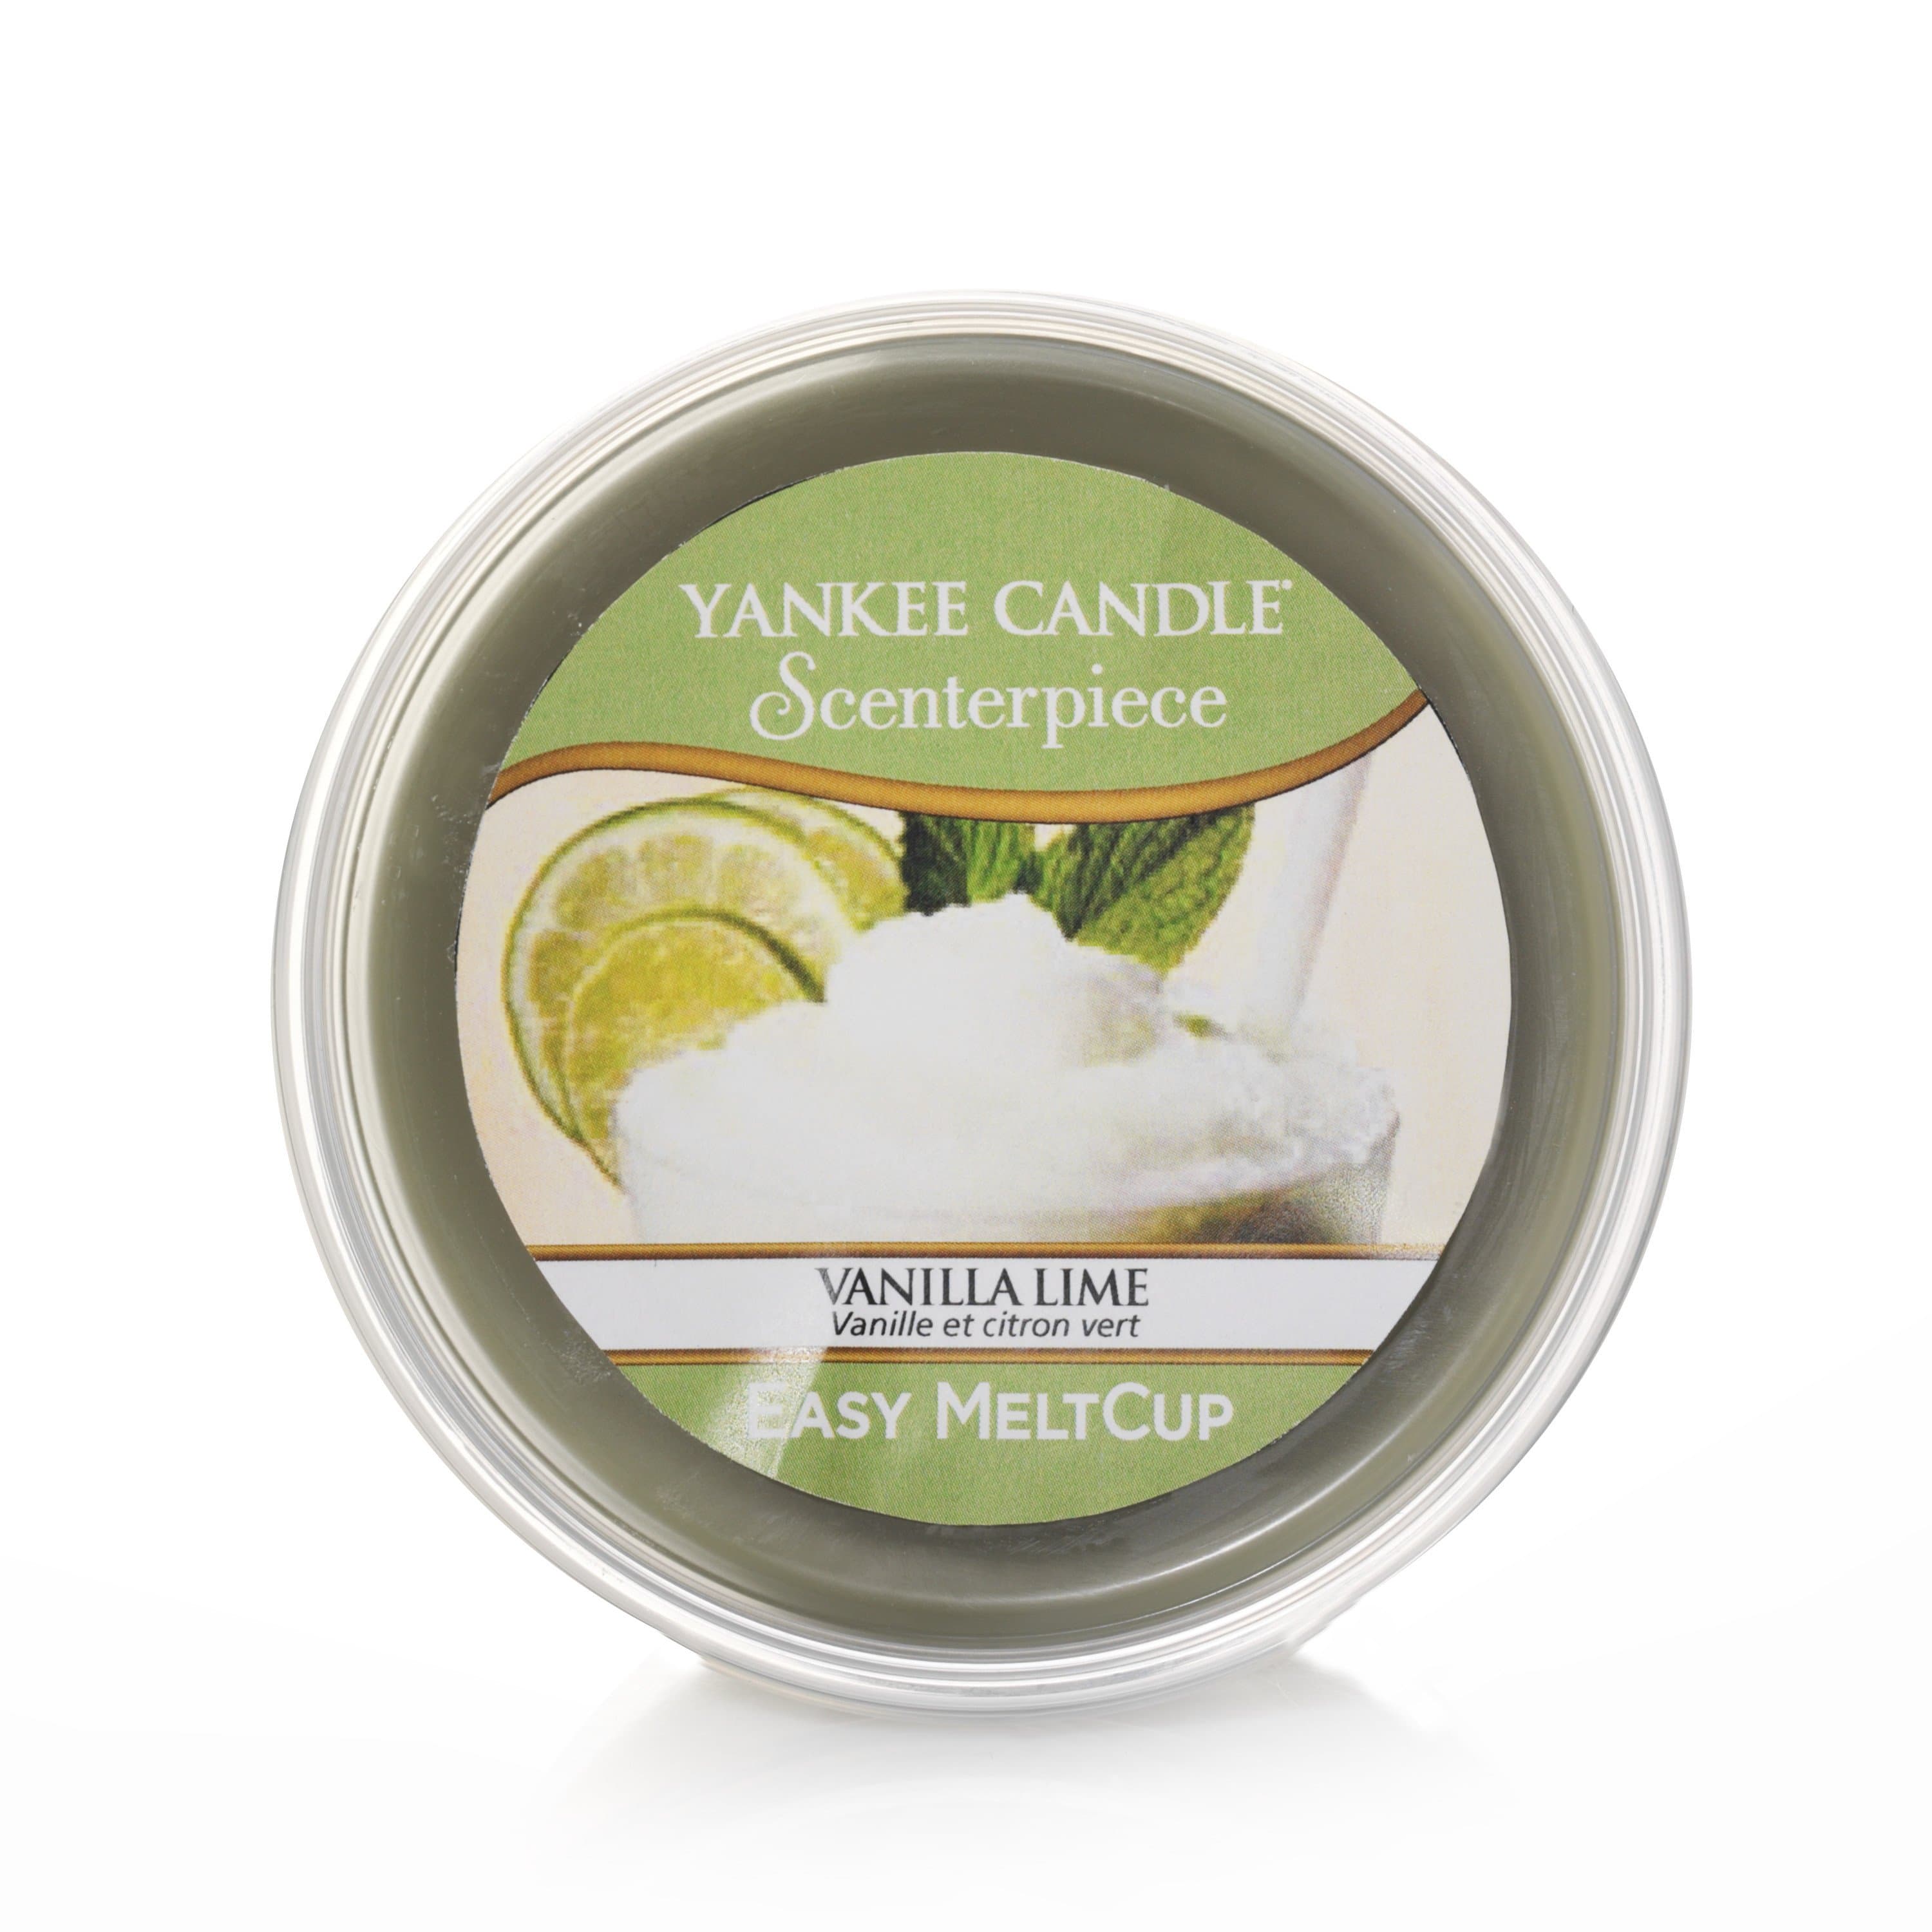 Yankee Candle Melt Cup Yankee Candle Scenterpiece Melt Cup - Vanilla Lime